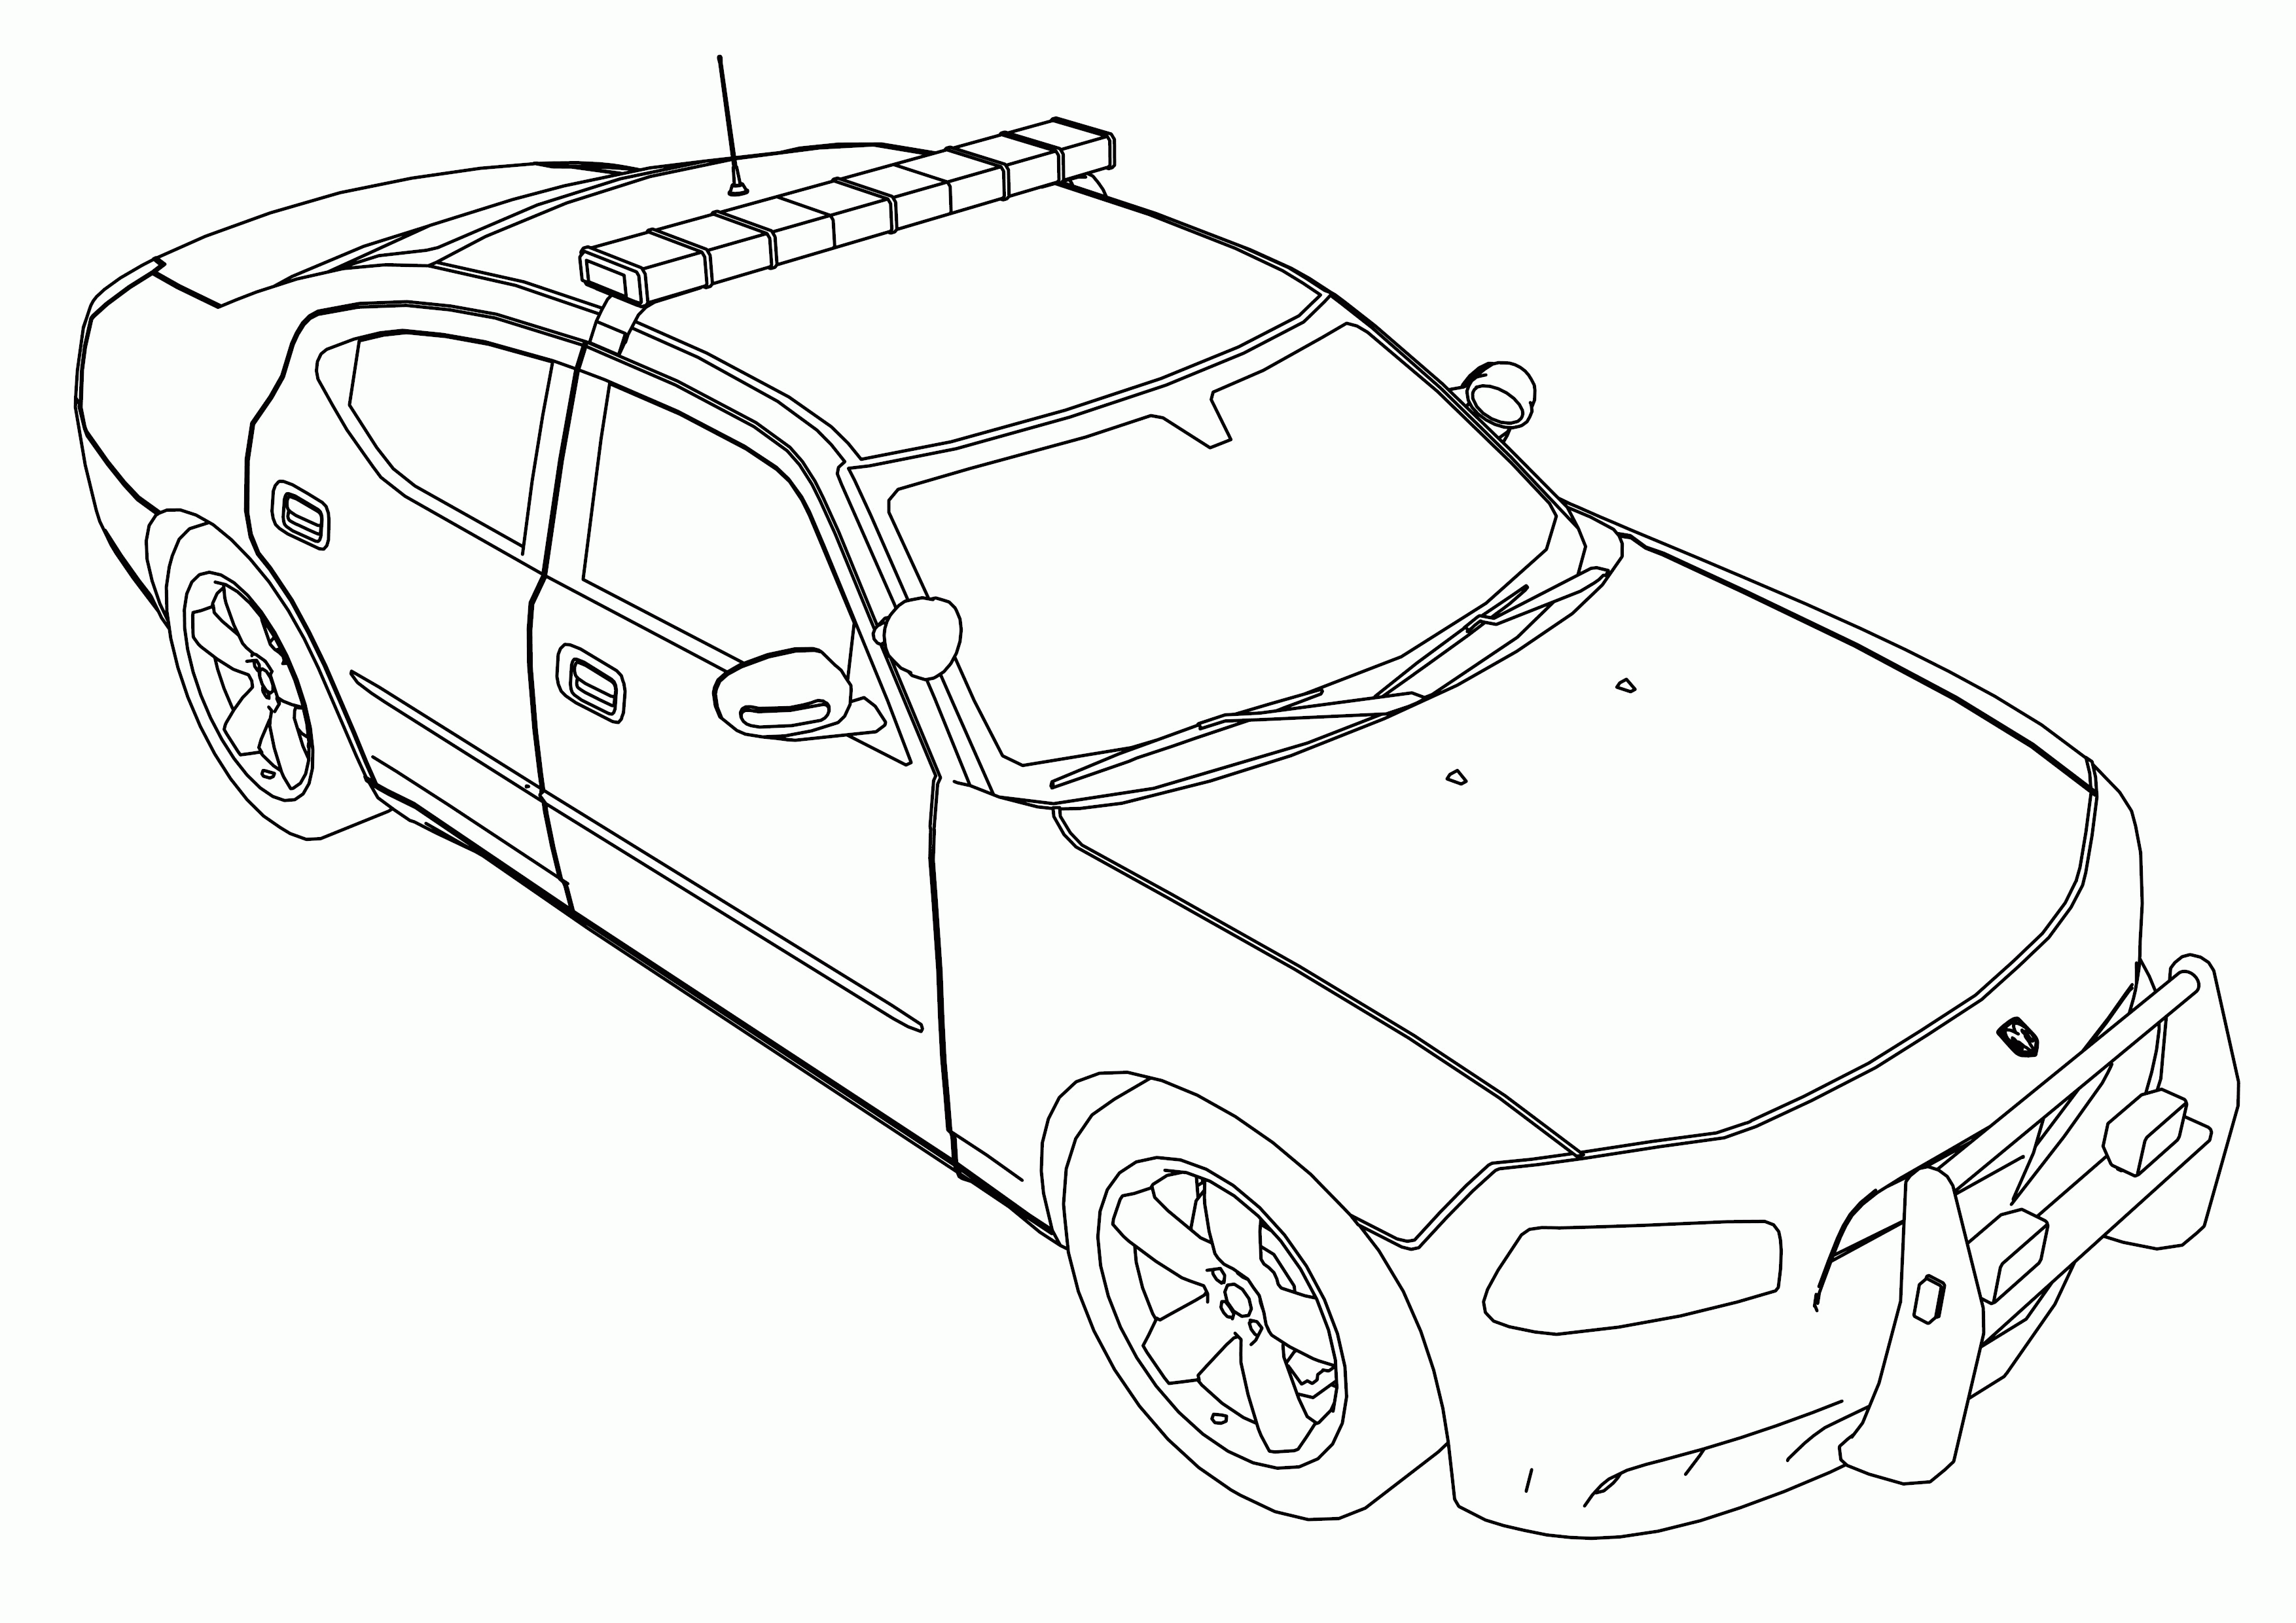 Police Car Coloring Pages To Print Coloring Home